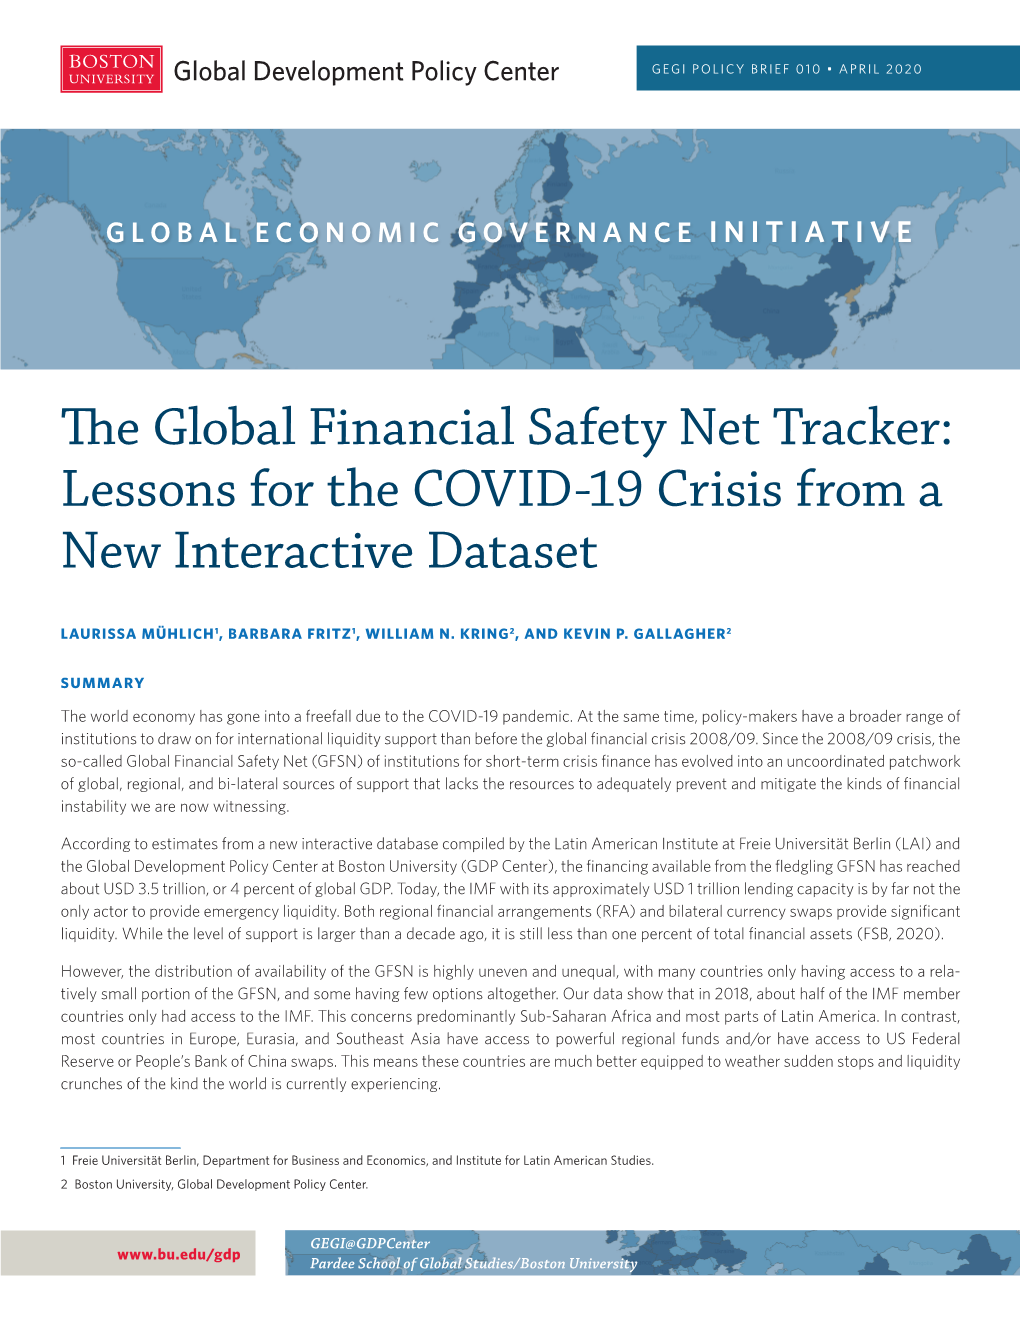 Global Financial Safety Net Tracker: Lessons for the COVID-19 Crisis from a New Interactive Dataset